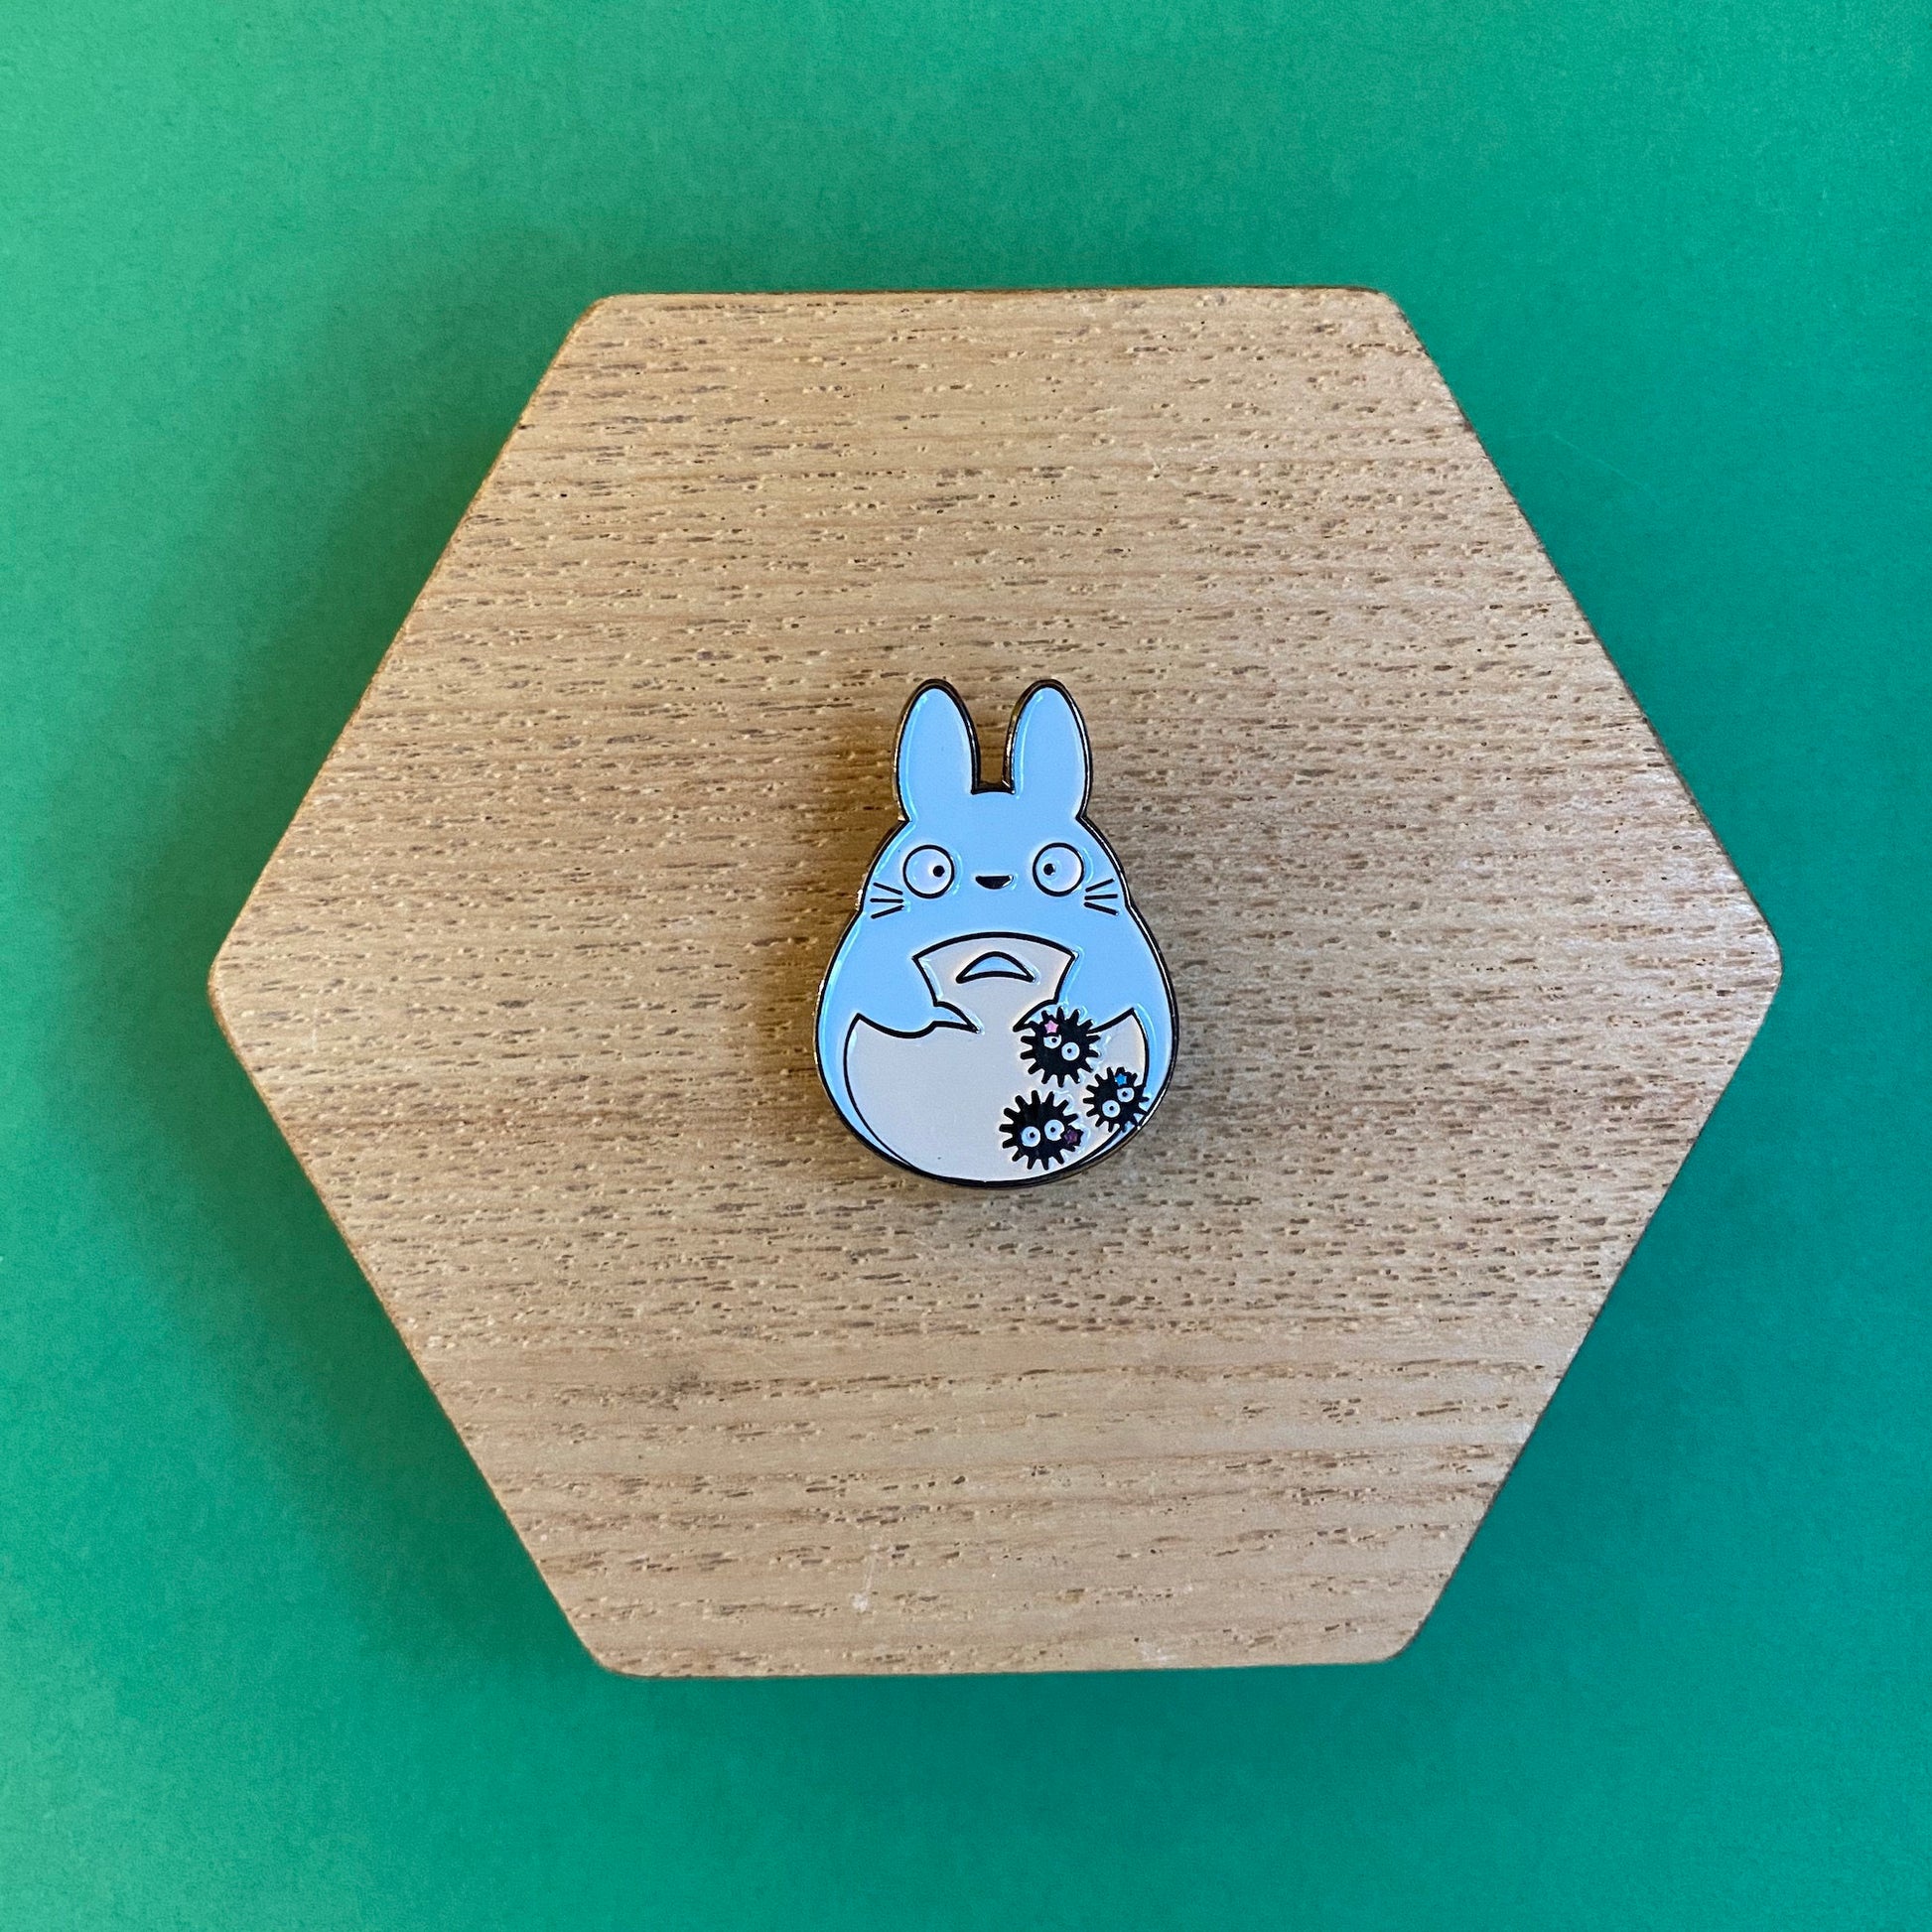 Totoro and his Soot Ball Friends Spirited Away Enamel Pin - thehappypin